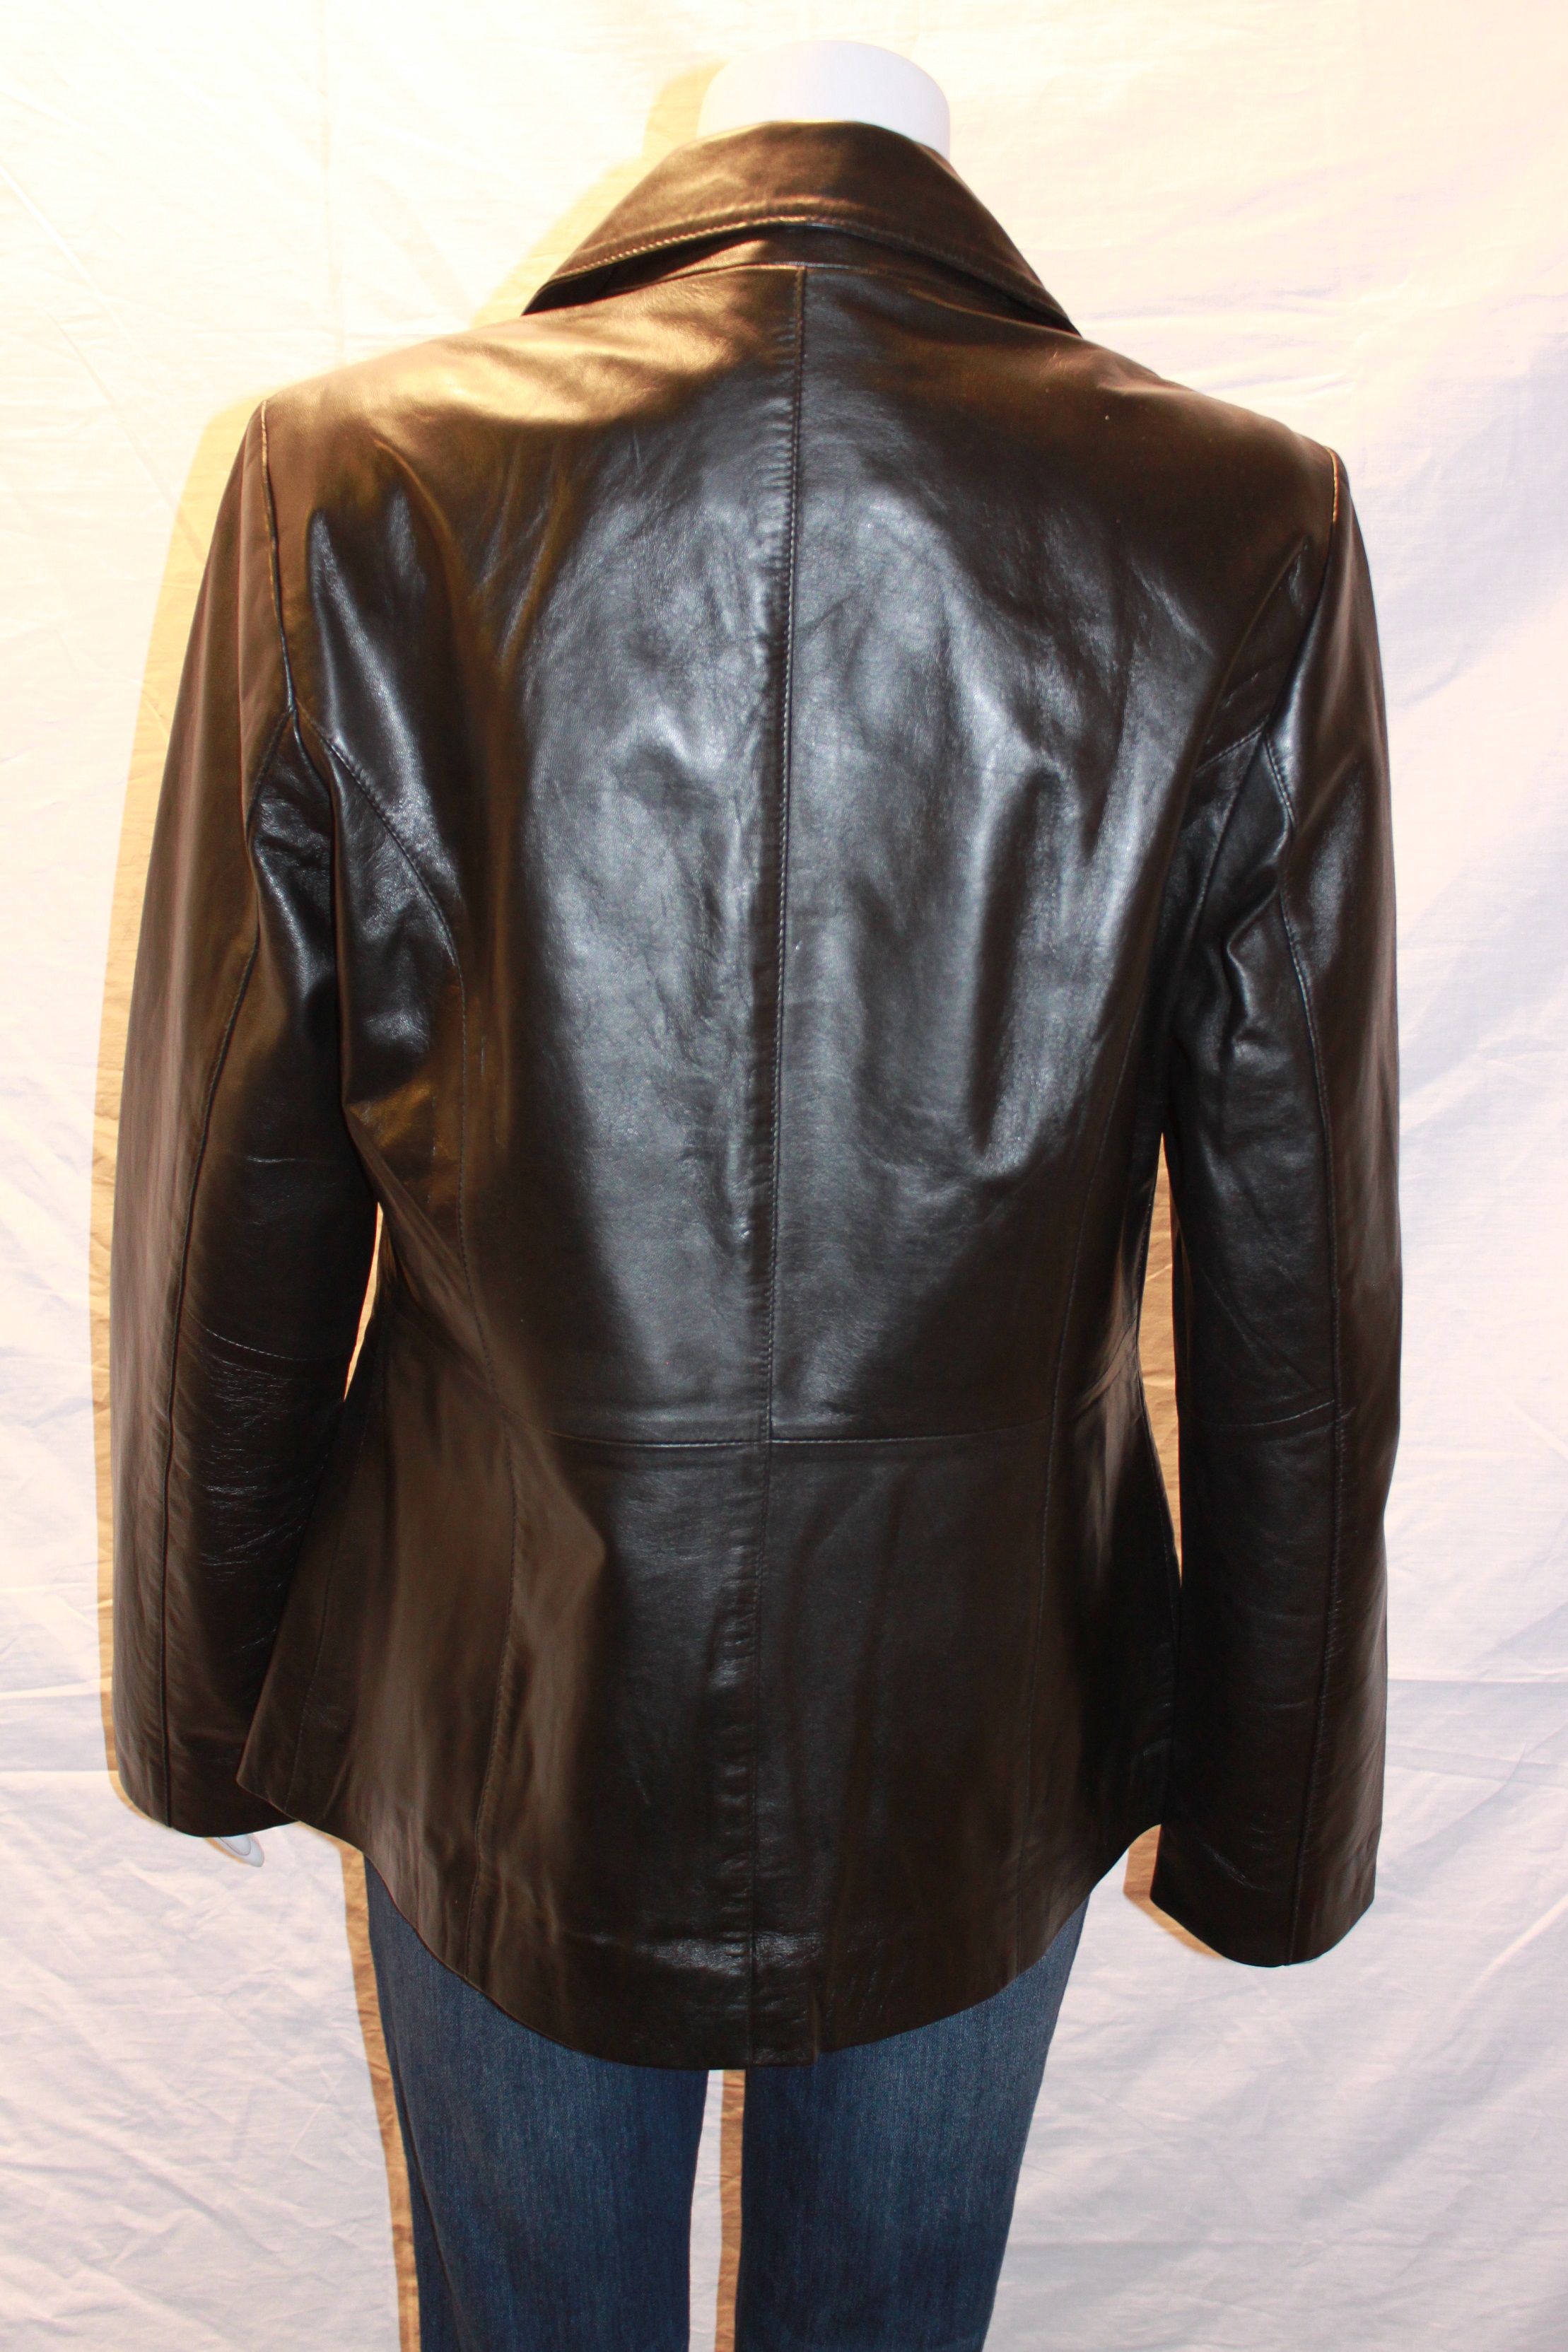 Ladies Leather Blazer - available in Black and Brown - Radford Leather ...